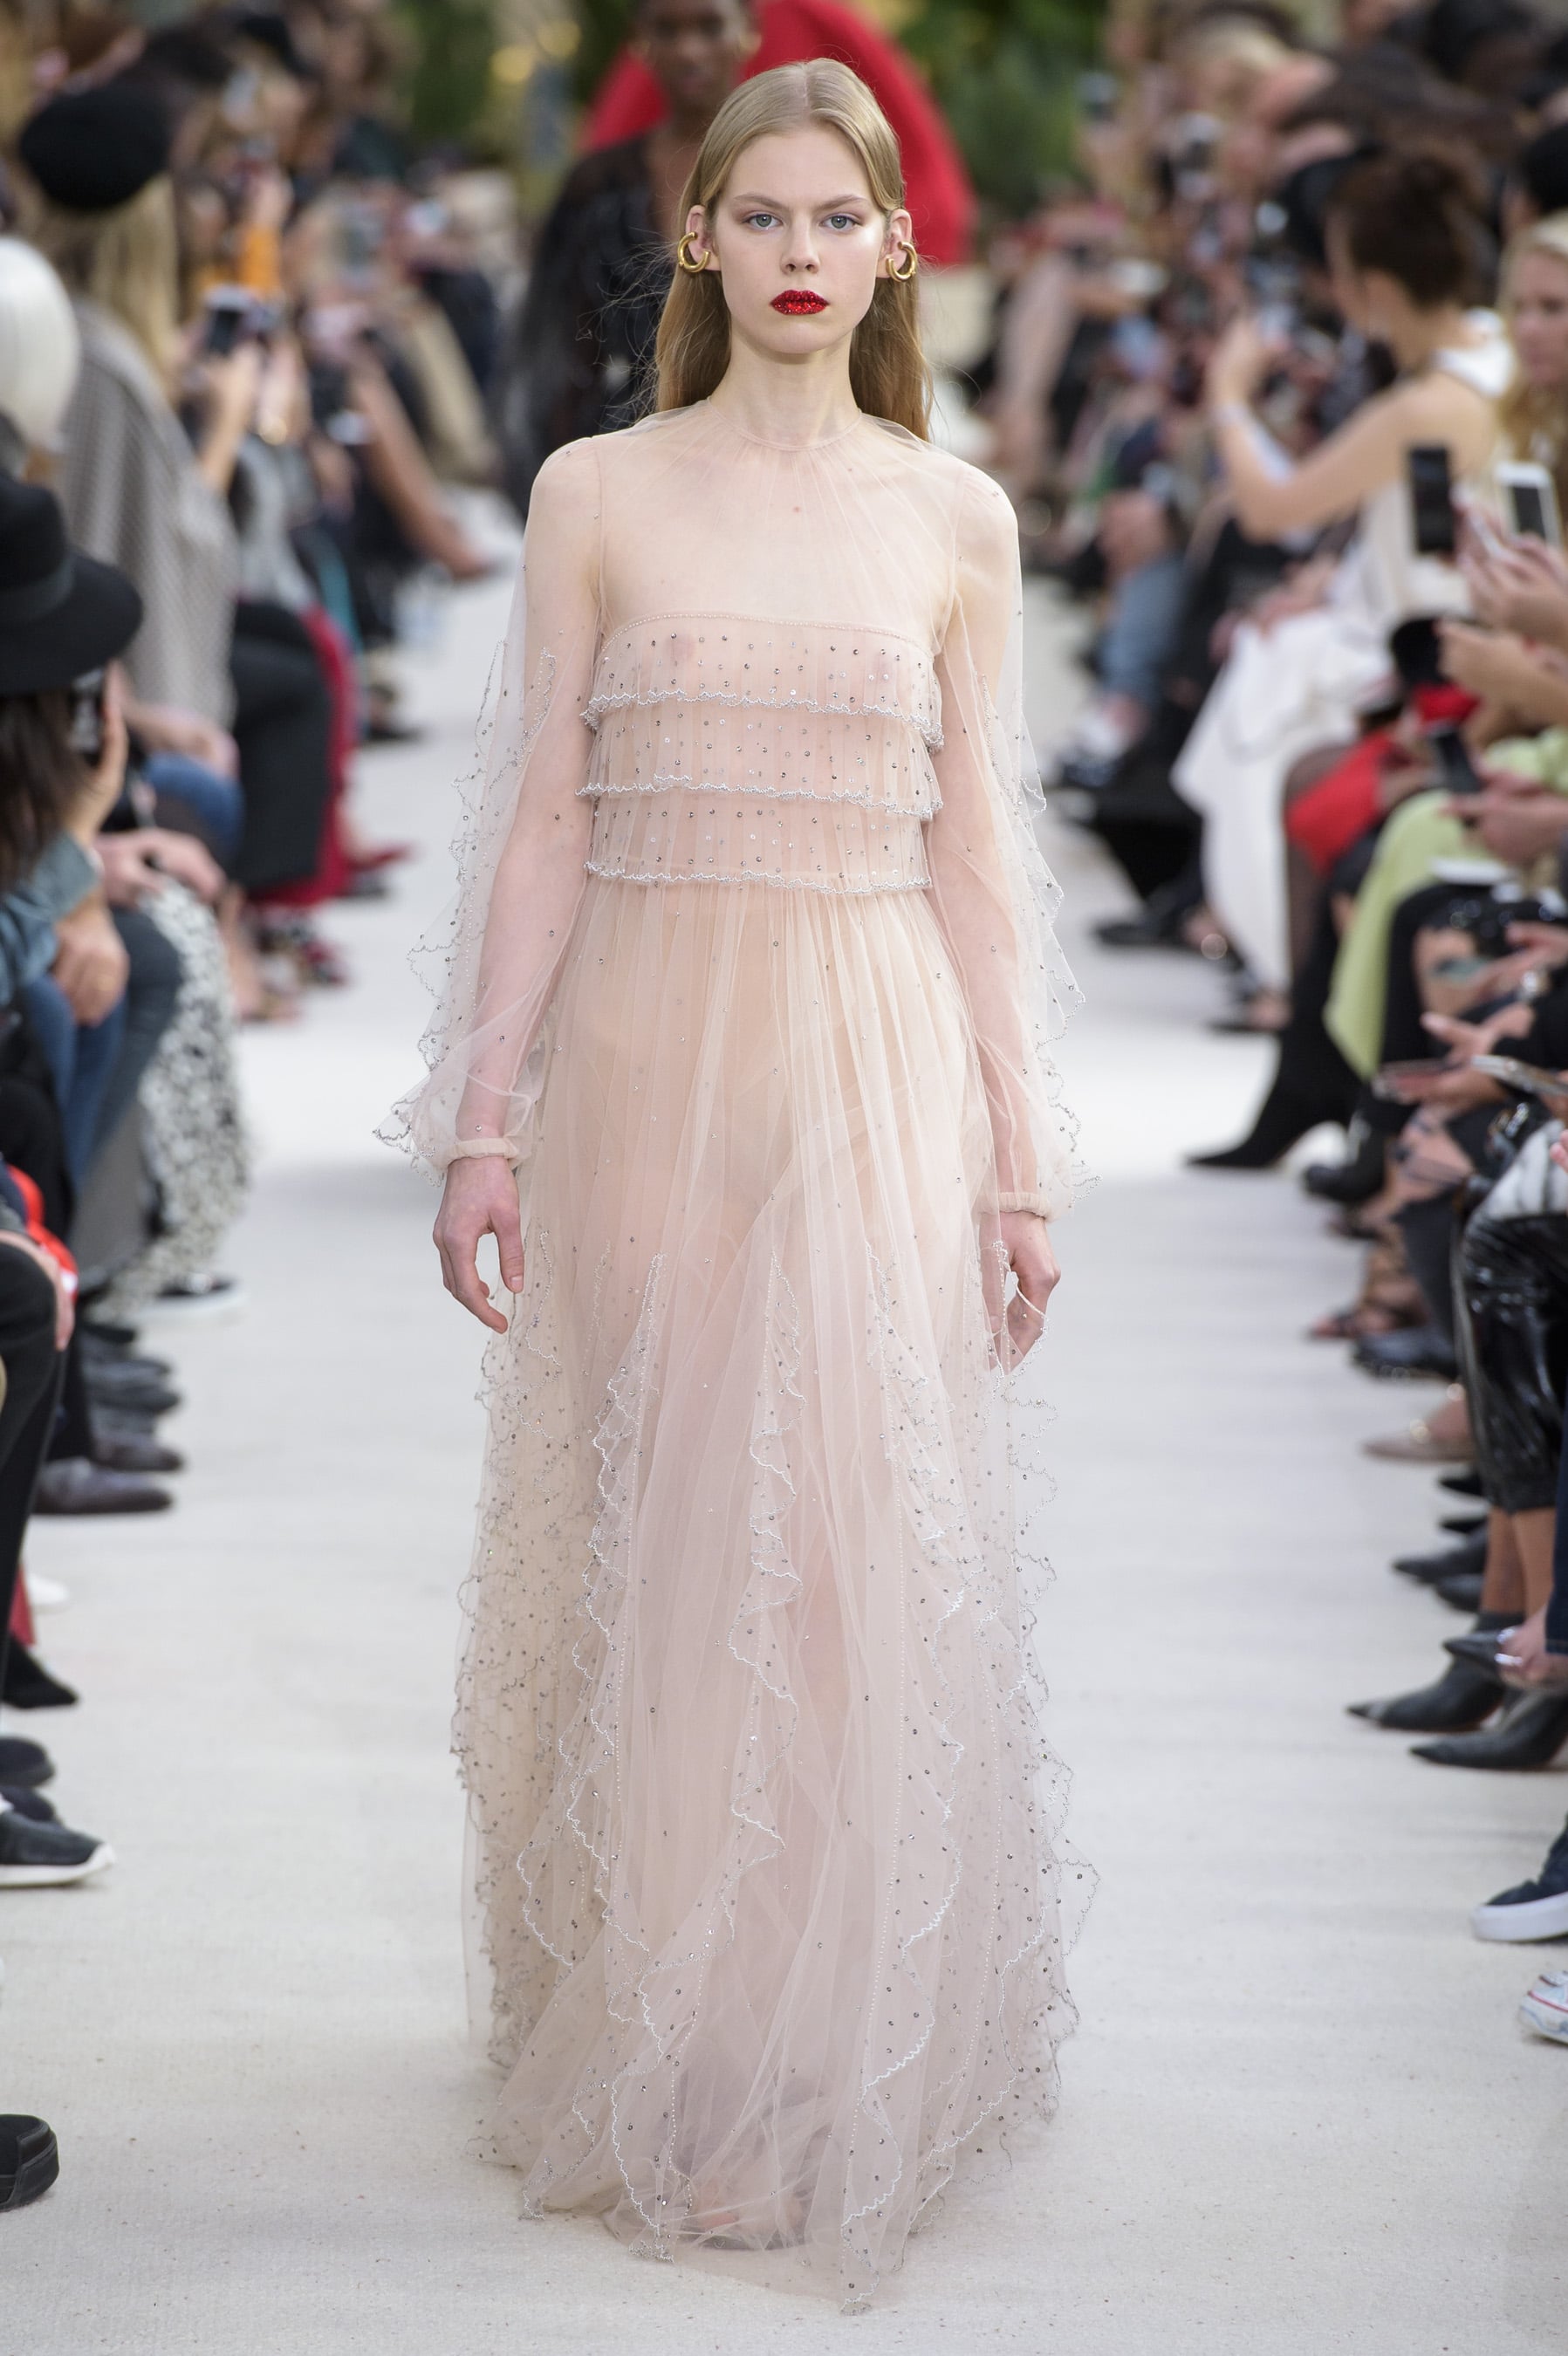 Fashion, Shopping & Style | Valentino's Spring Dresses Are So Gorgeous, Might Tear Up a Bit | POPSUGAR Fashion Photo 62